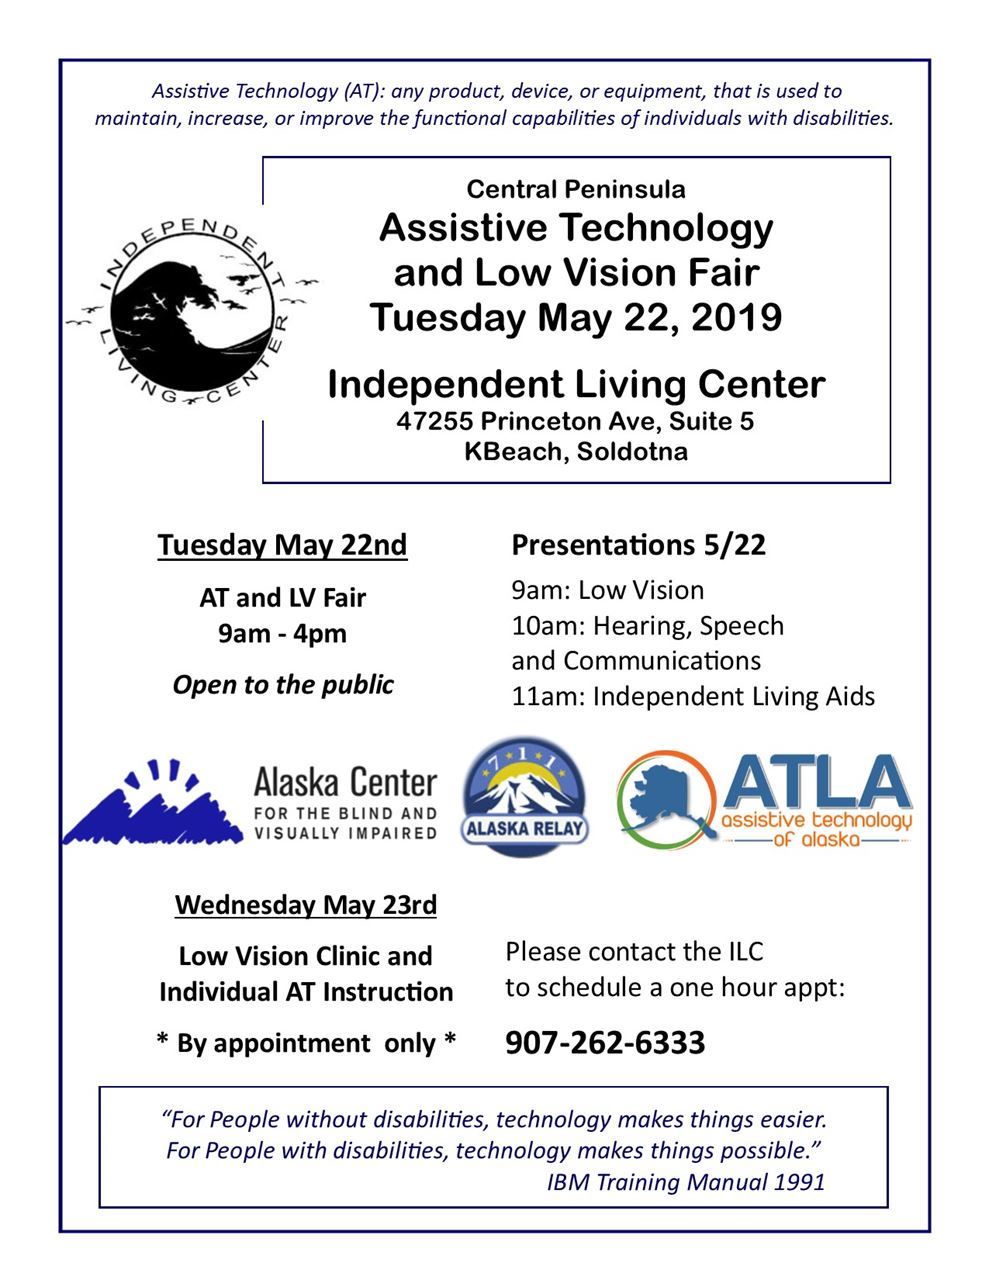 Central Peninsula Assistive Technology and Low Vision Fair Tuesday May 22nd 2019 at the ILC office 47255 Prinston Ave Suite 5 off of KBeach in Soldotna, Contat phone 907-262-6333